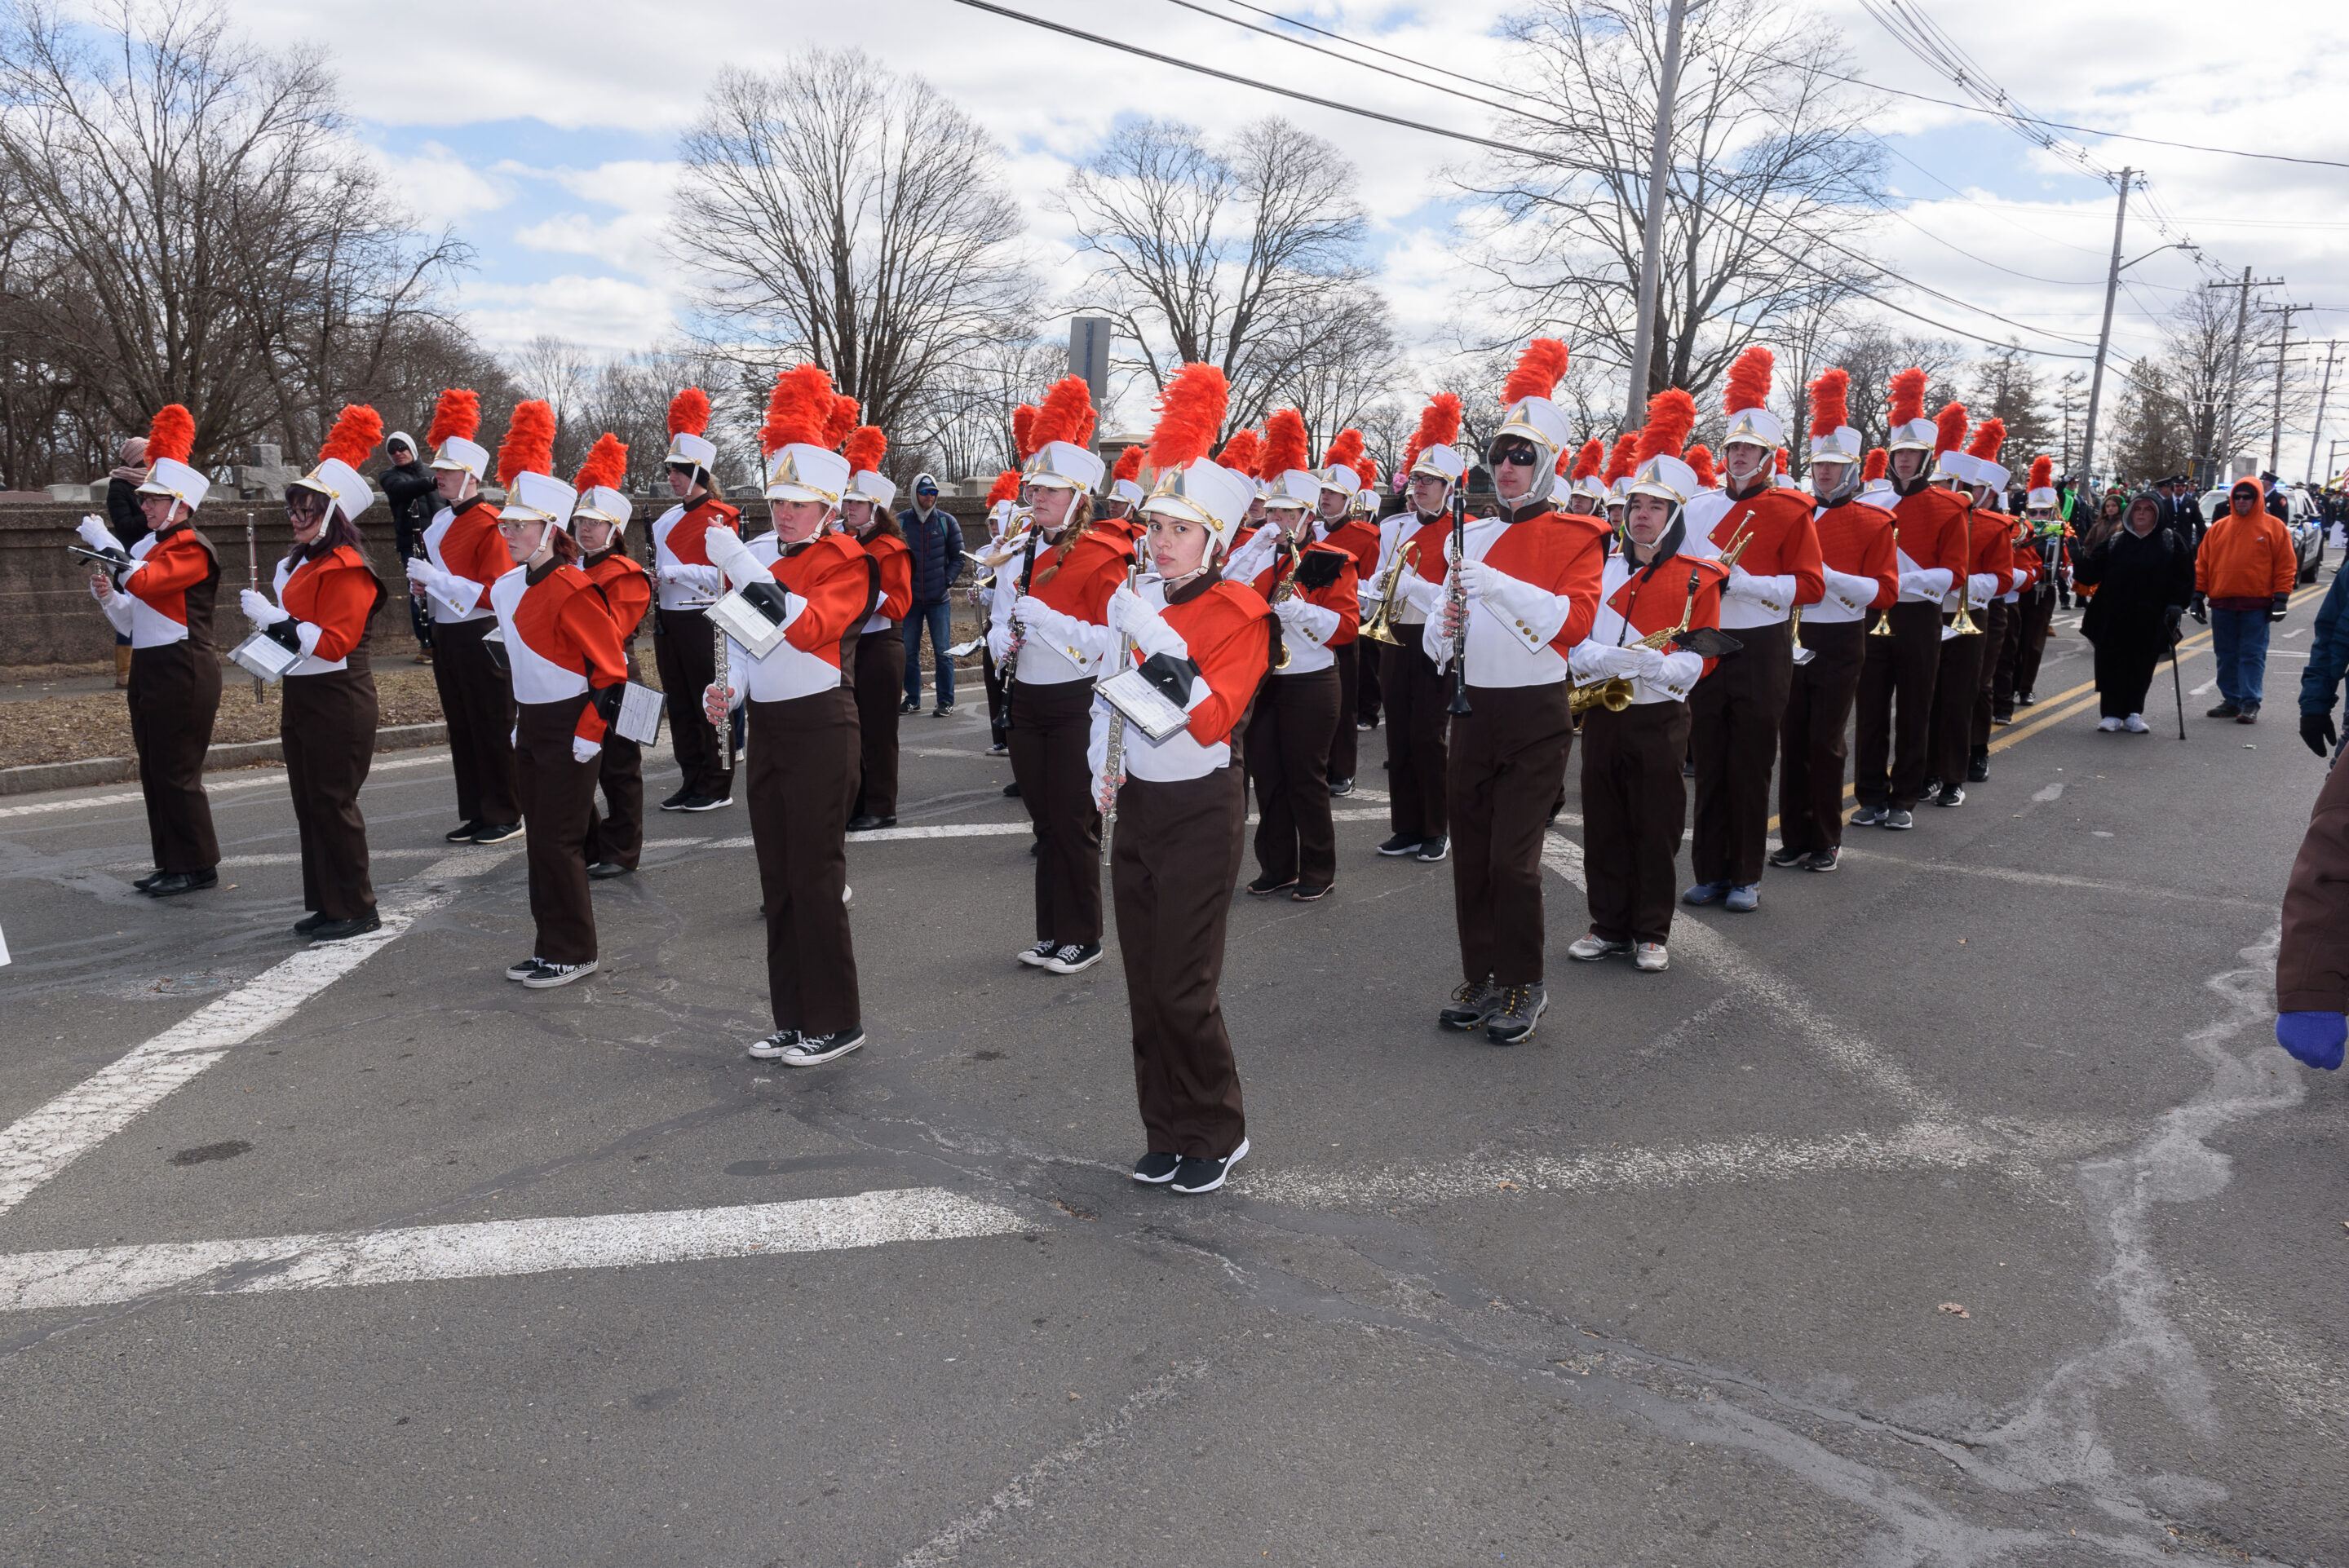 Agawam HS band votes not to march in St. Patrick’s Parade